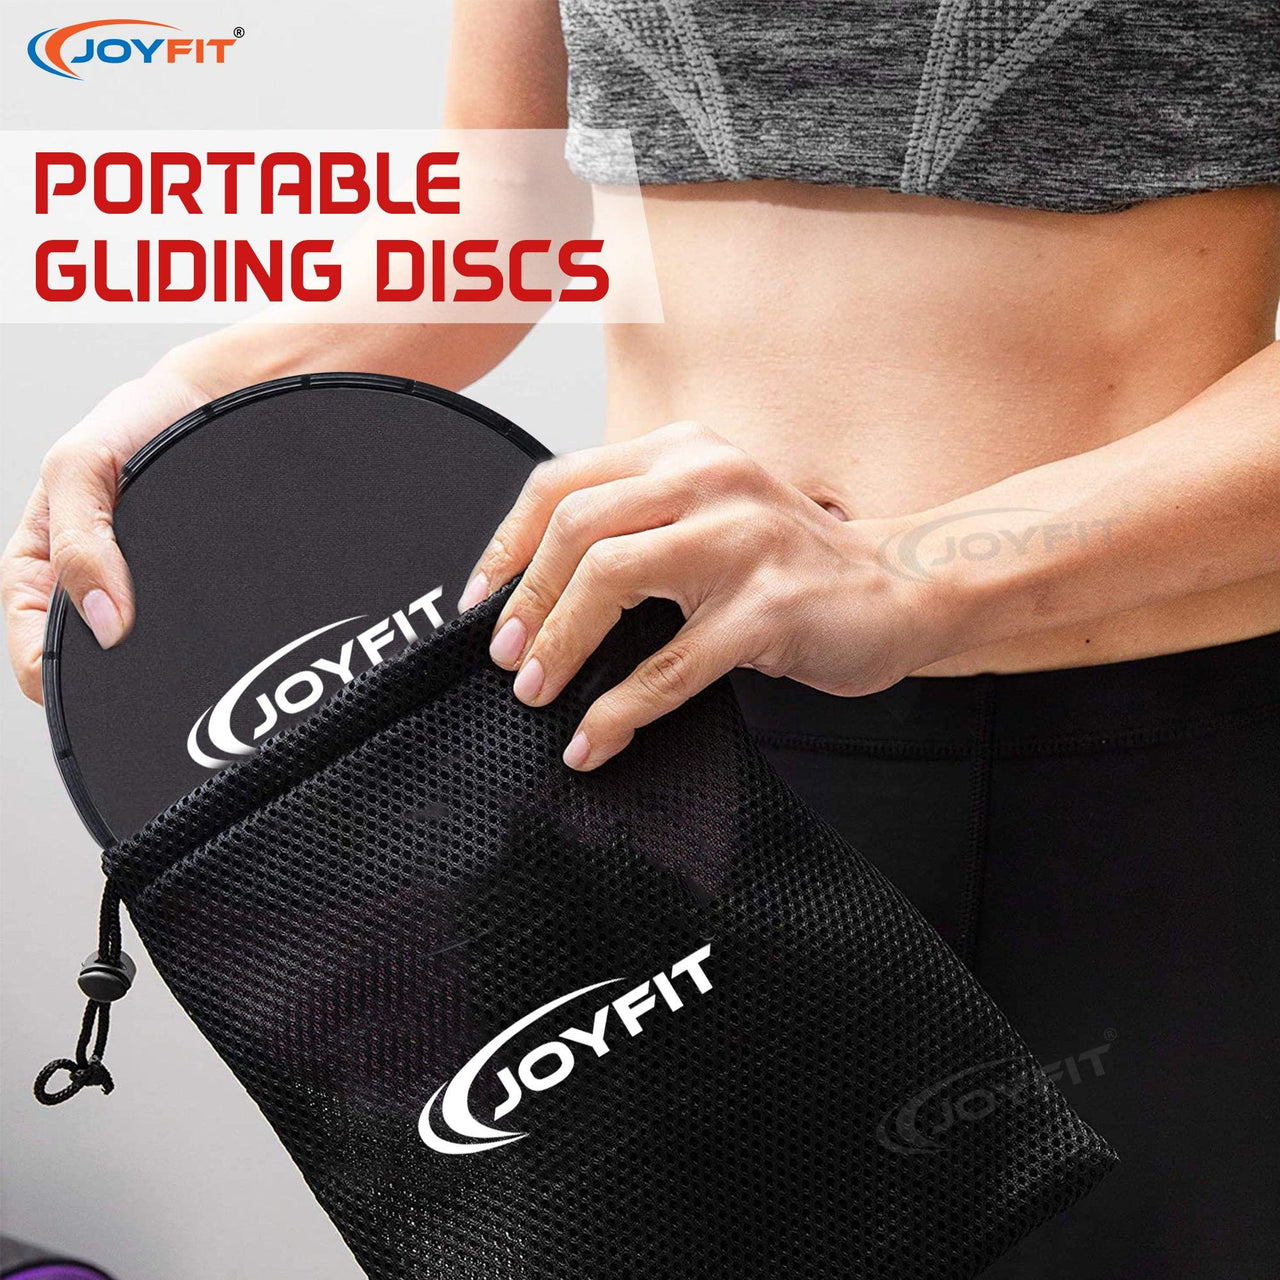 Dual Sided Exercise Gliding Discs/Core Sliders